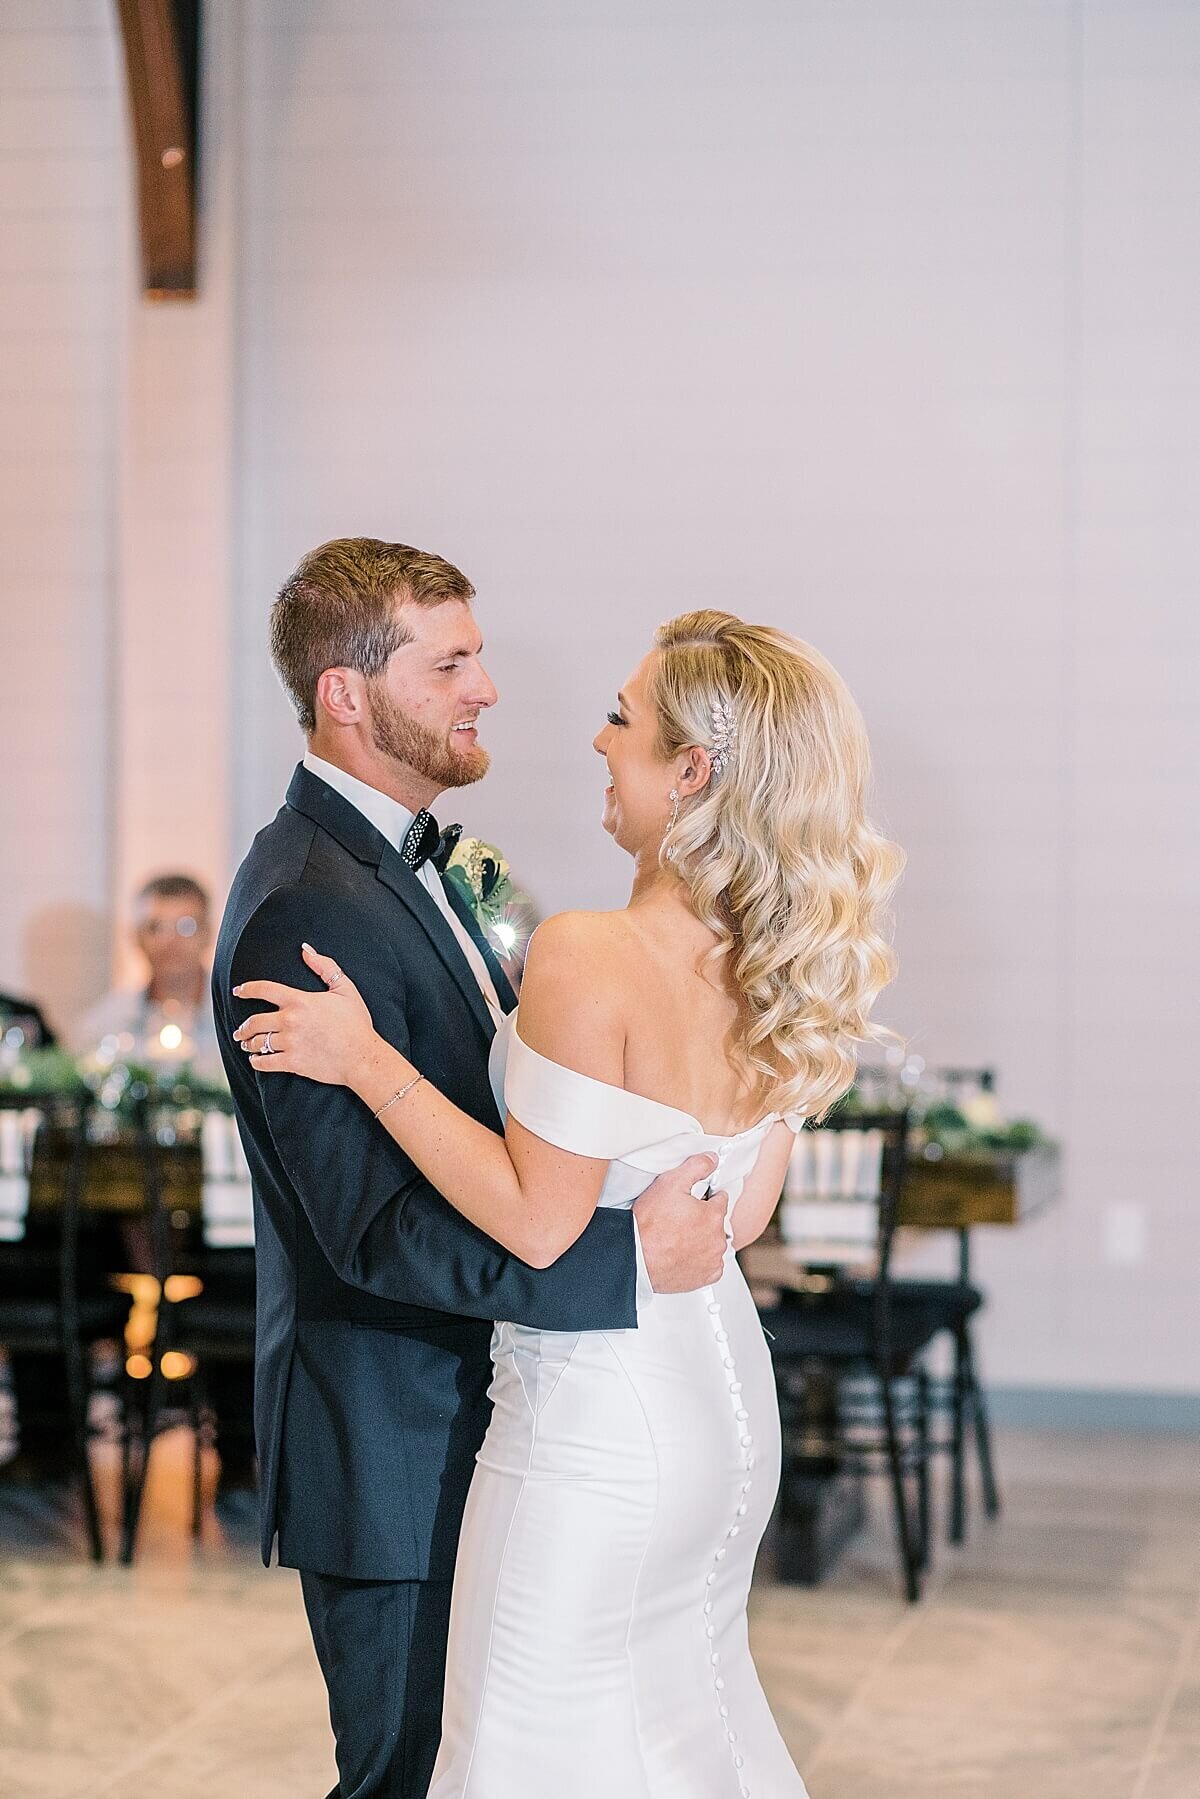 Reception at Black and White Themed Annex Wedding photographed by Alicia Yarrish Photography